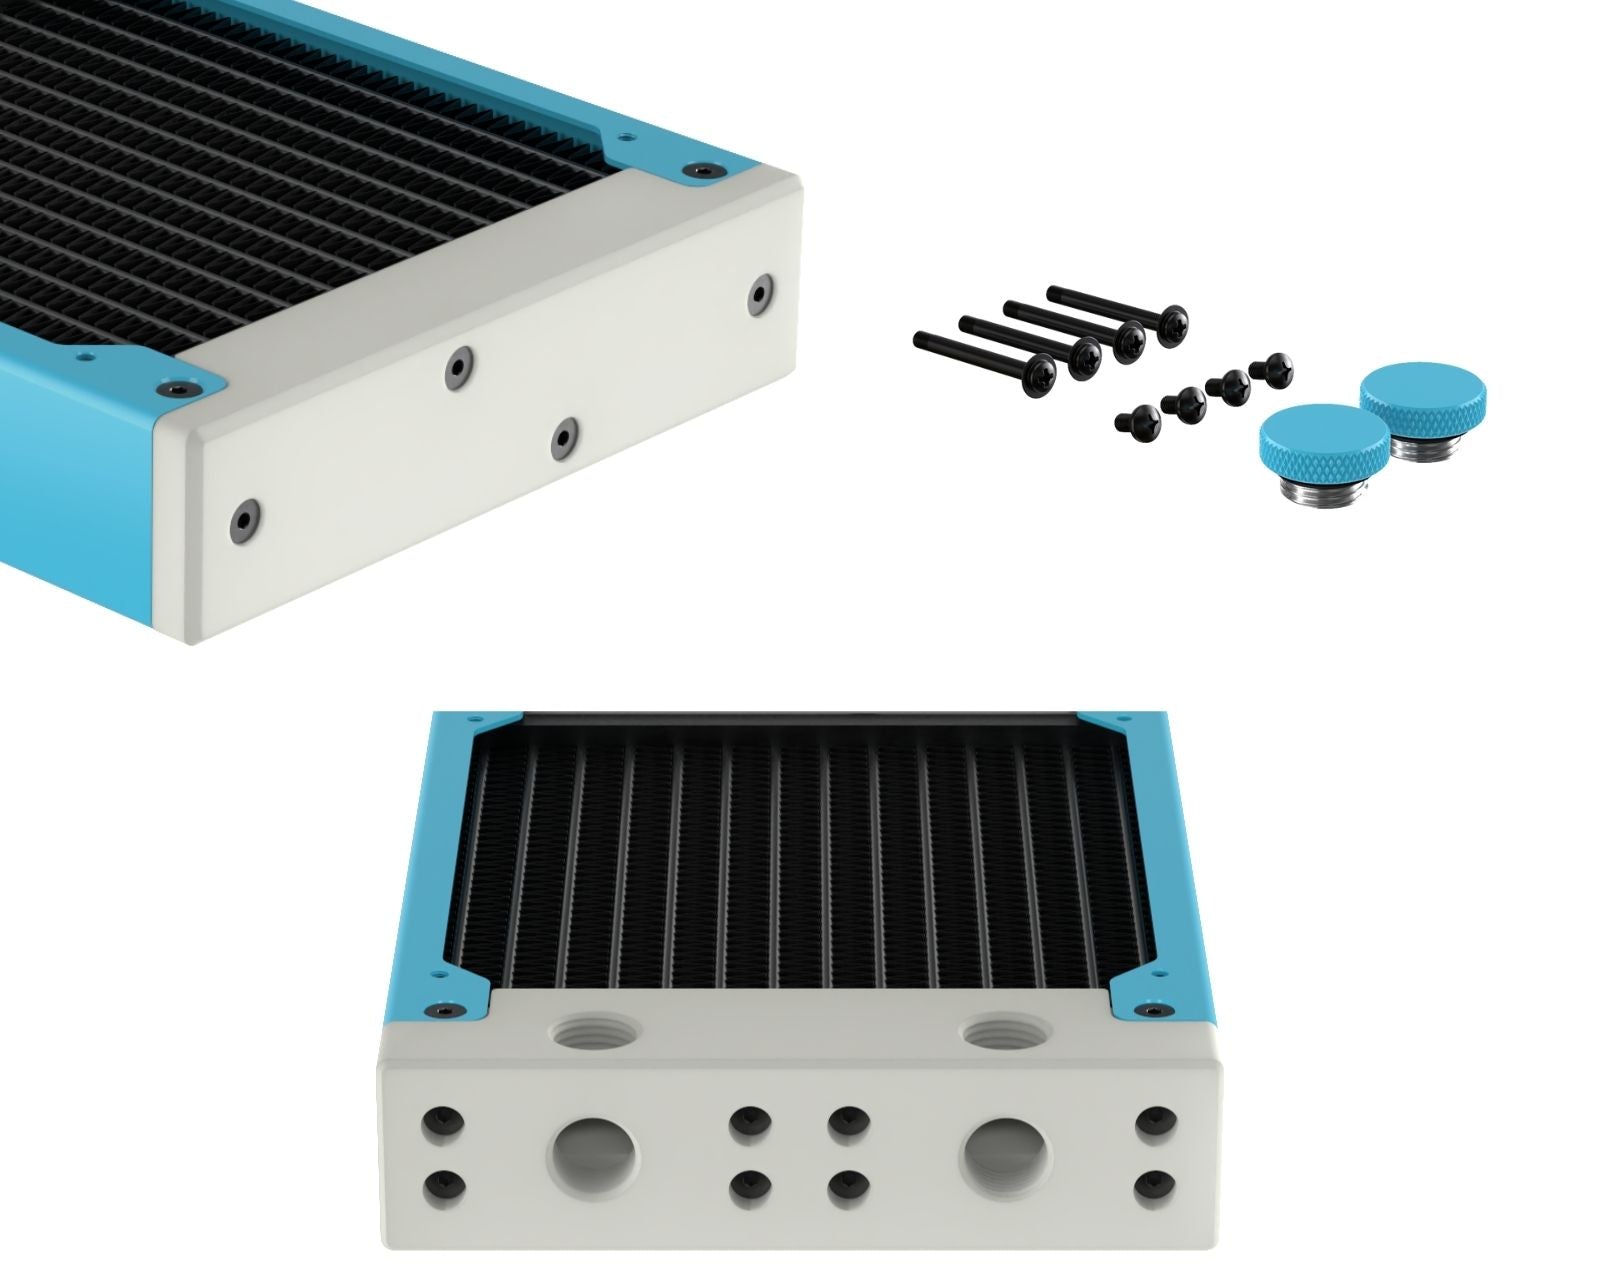 PrimoChill 120SL (30mm) EXIMO Modular Radiator, White POM, 1x120mm, Single Fan (R-SL-W12) Available in 20+ Colors, Assembled in USA and Custom Watercooling Loop Ready - Sky Blue